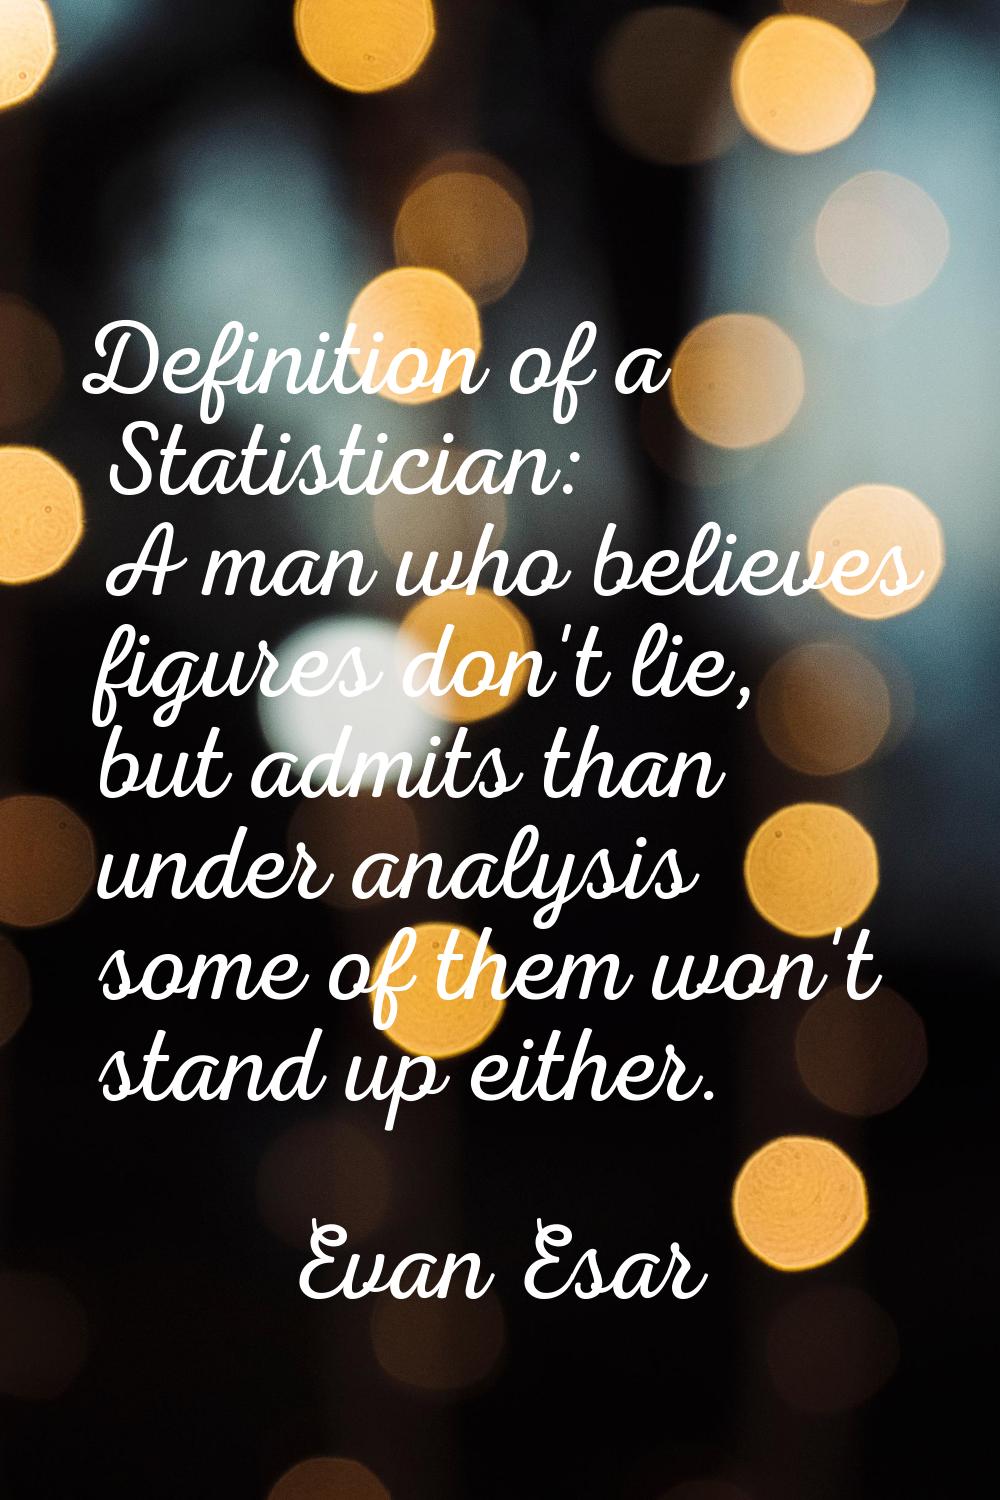 Definition of a Statistician: A man who believes figures don't lie, but admits than under analysis 